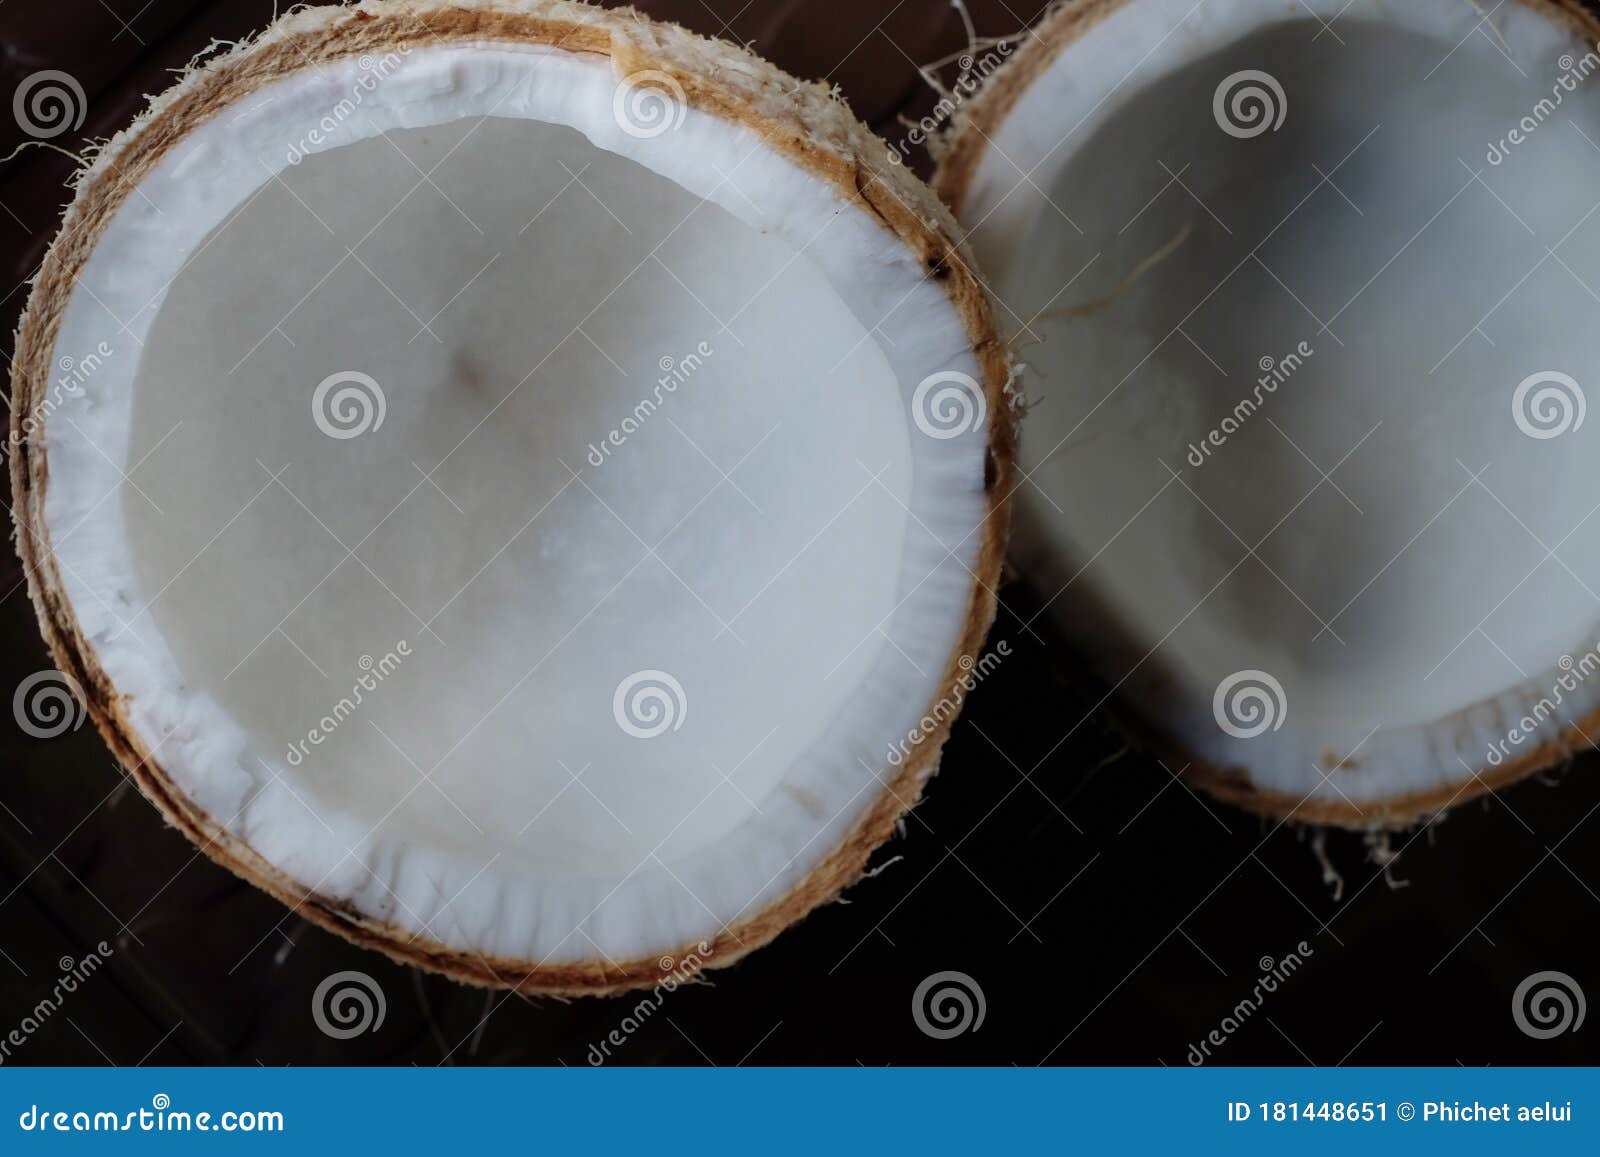 The Coconut is Cut To See the White Flesh. Stock Image - Image of flesh ...